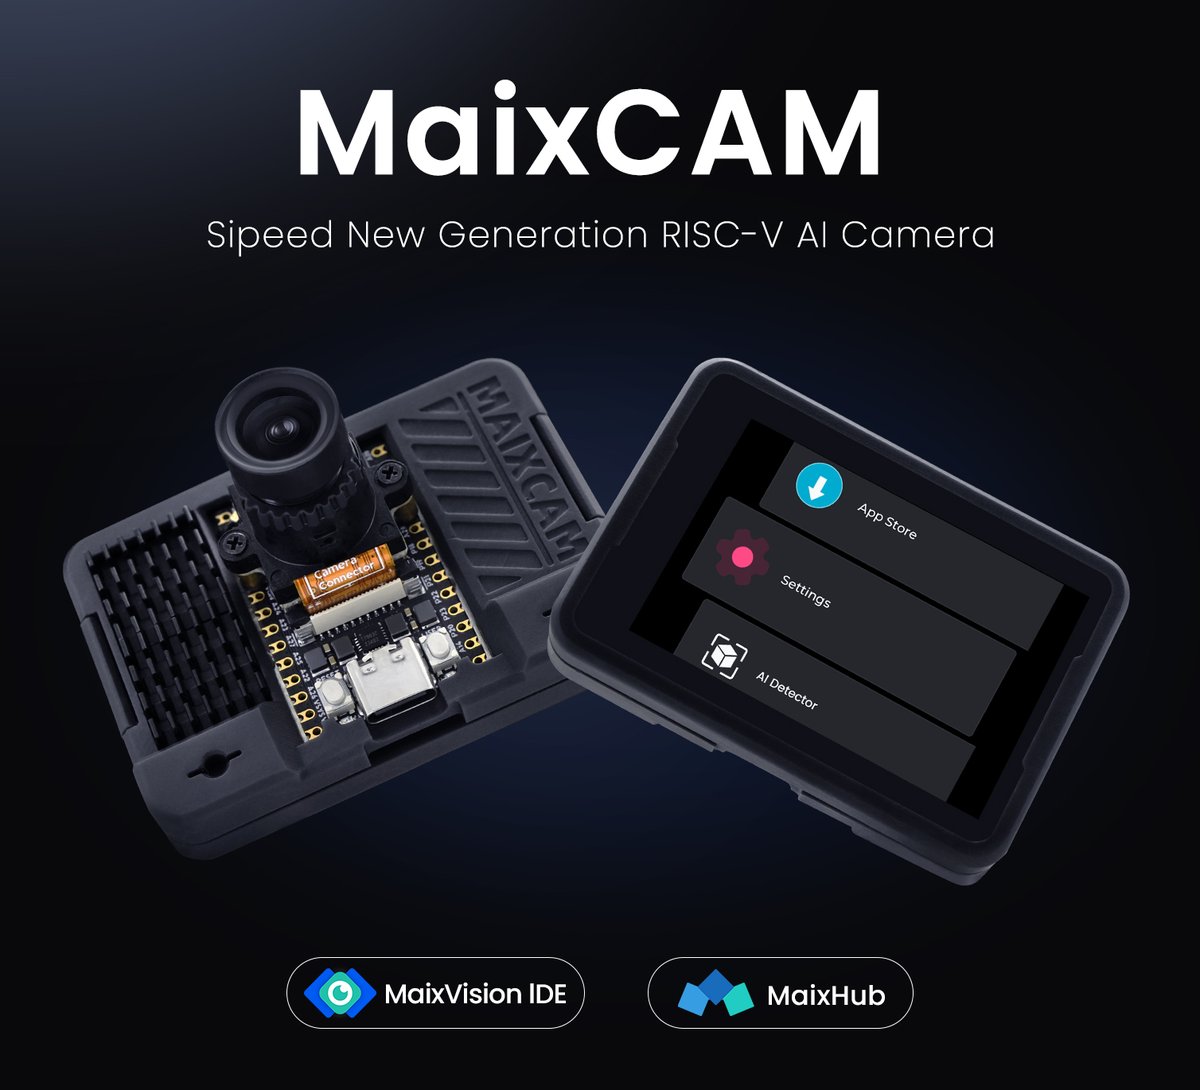 New Generation #RISCV #AI #Camera come out~ Plenty features update!
MaixPy&MaixCDK: compatible Python&C++ API!
MaixVision: Powerful&Easy-to-use IDE!
MaixHub: oneline AI model training & APP store!
Deploy your edge APP by one tap~

try it out:
aliexpress.us/item/100500691…